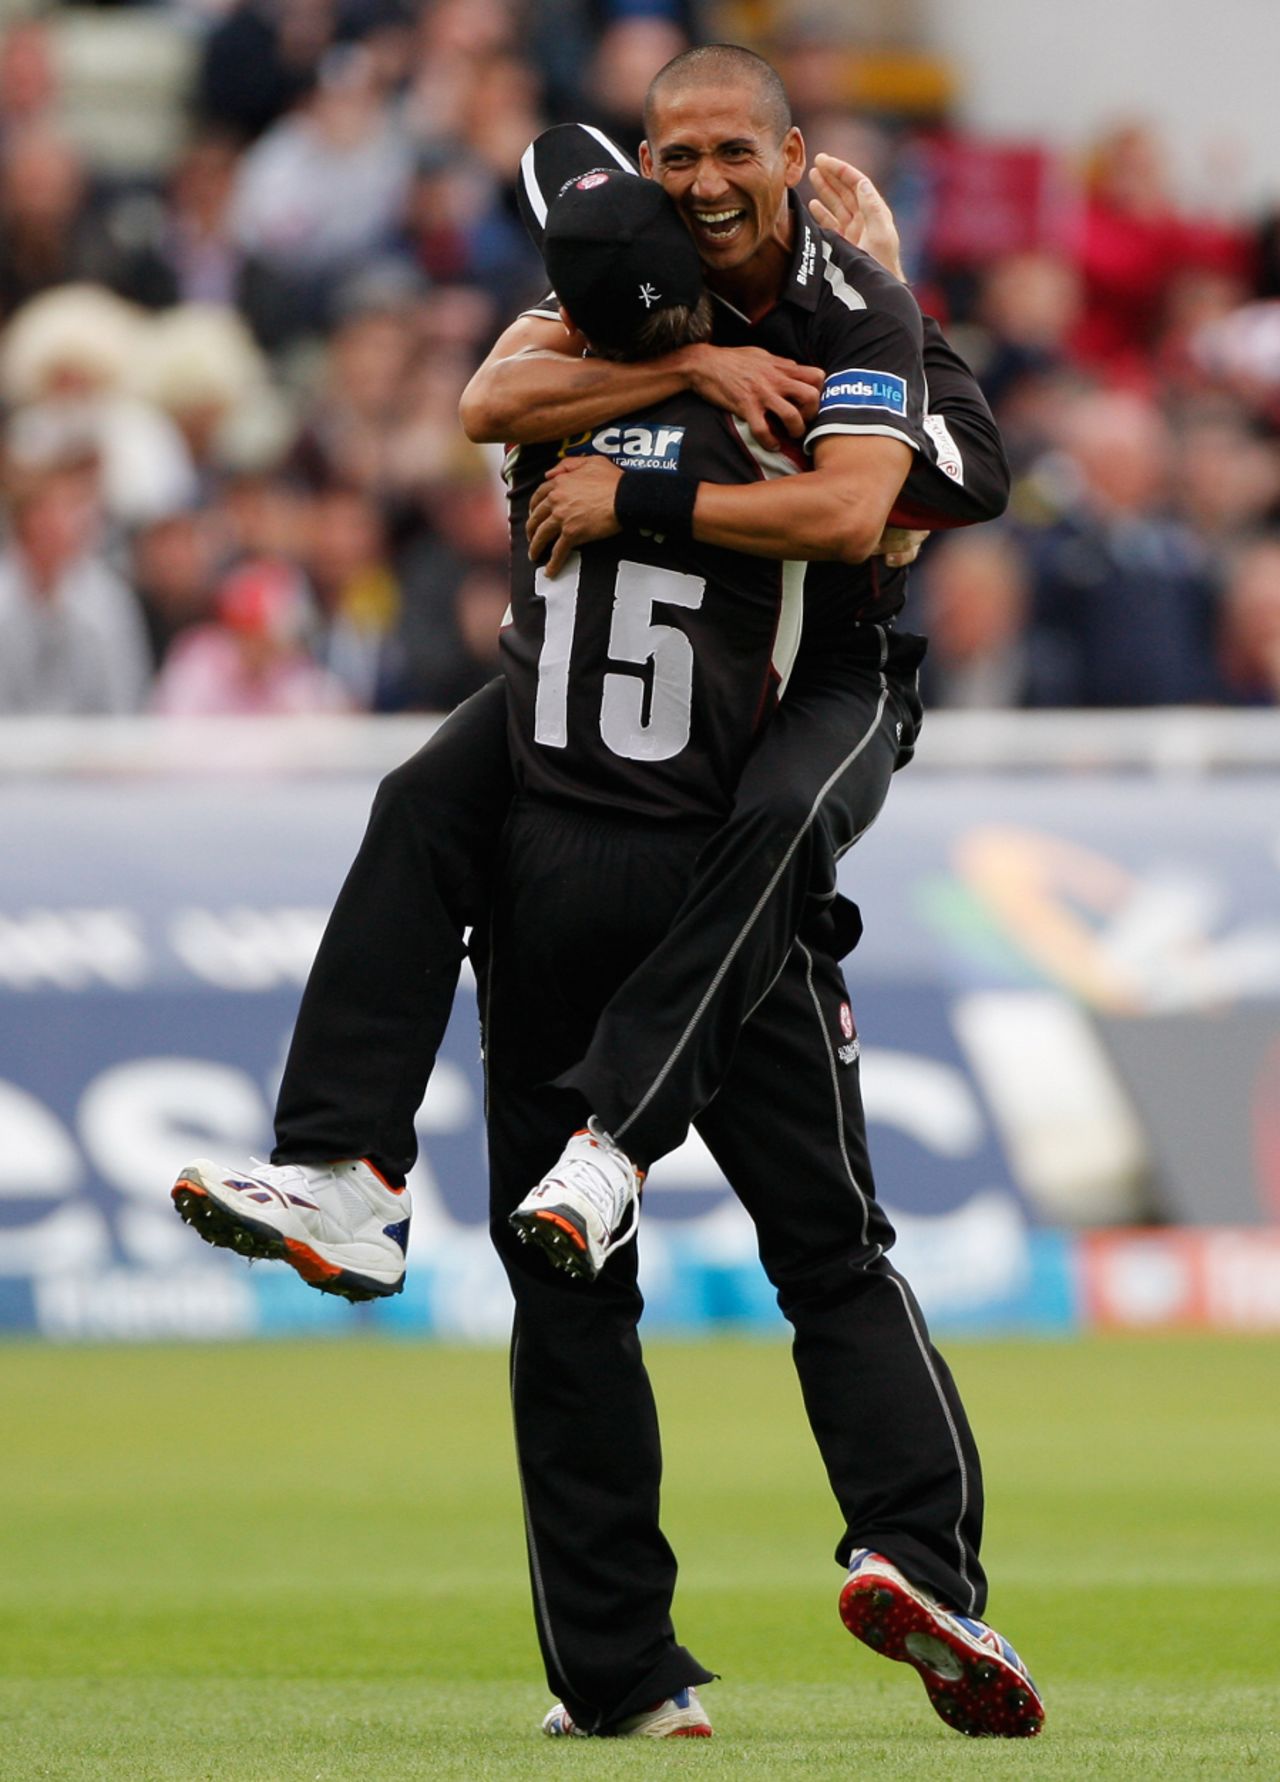 Alfonso Thomas celebrates Somerset's win over Hampshire in the One-over Eliminator, Hampshire v Somerset, Friends Life t20, 2nd Semi Final, Edgbaston, August 27 2011